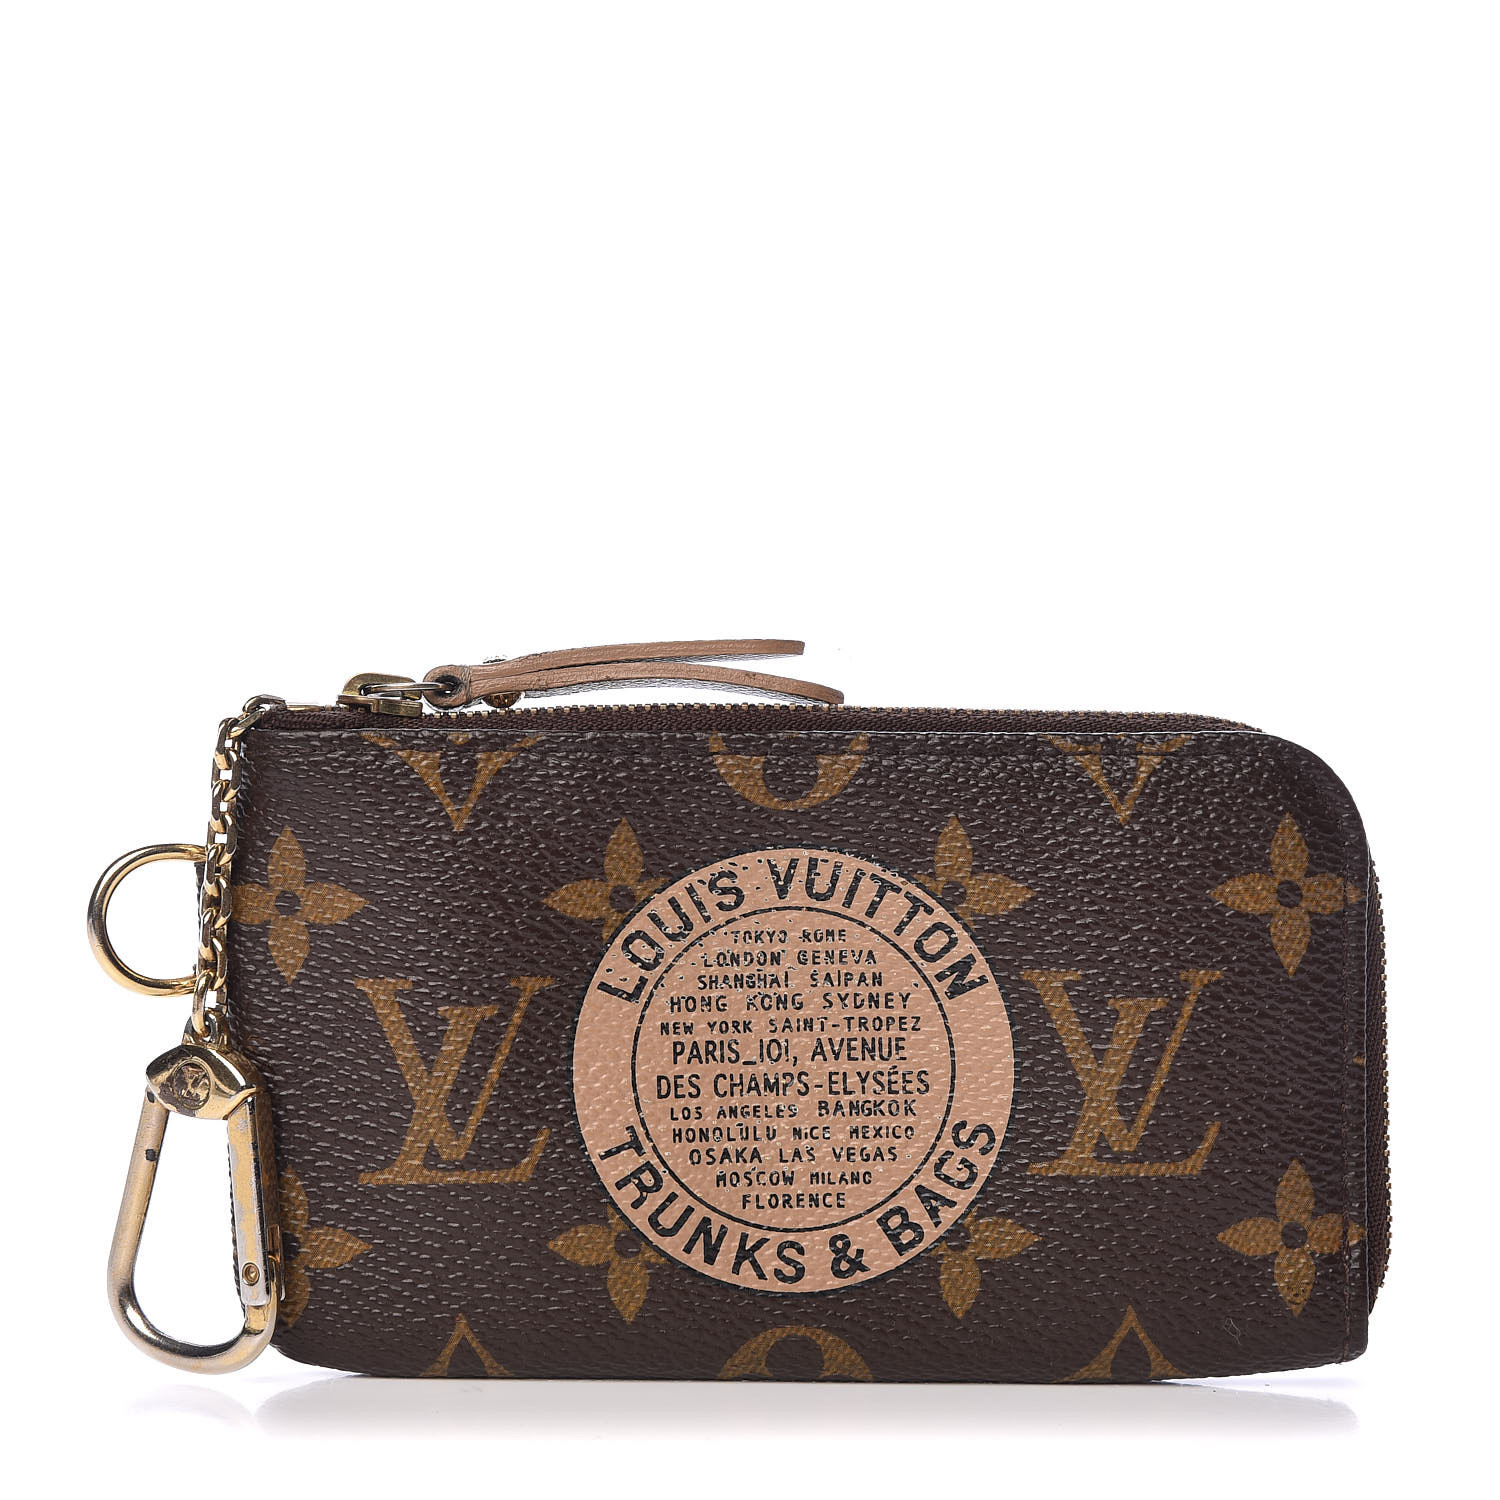 LOUIS VUITTON Monogram Complice Trunks and Bags Key Pouch 454694